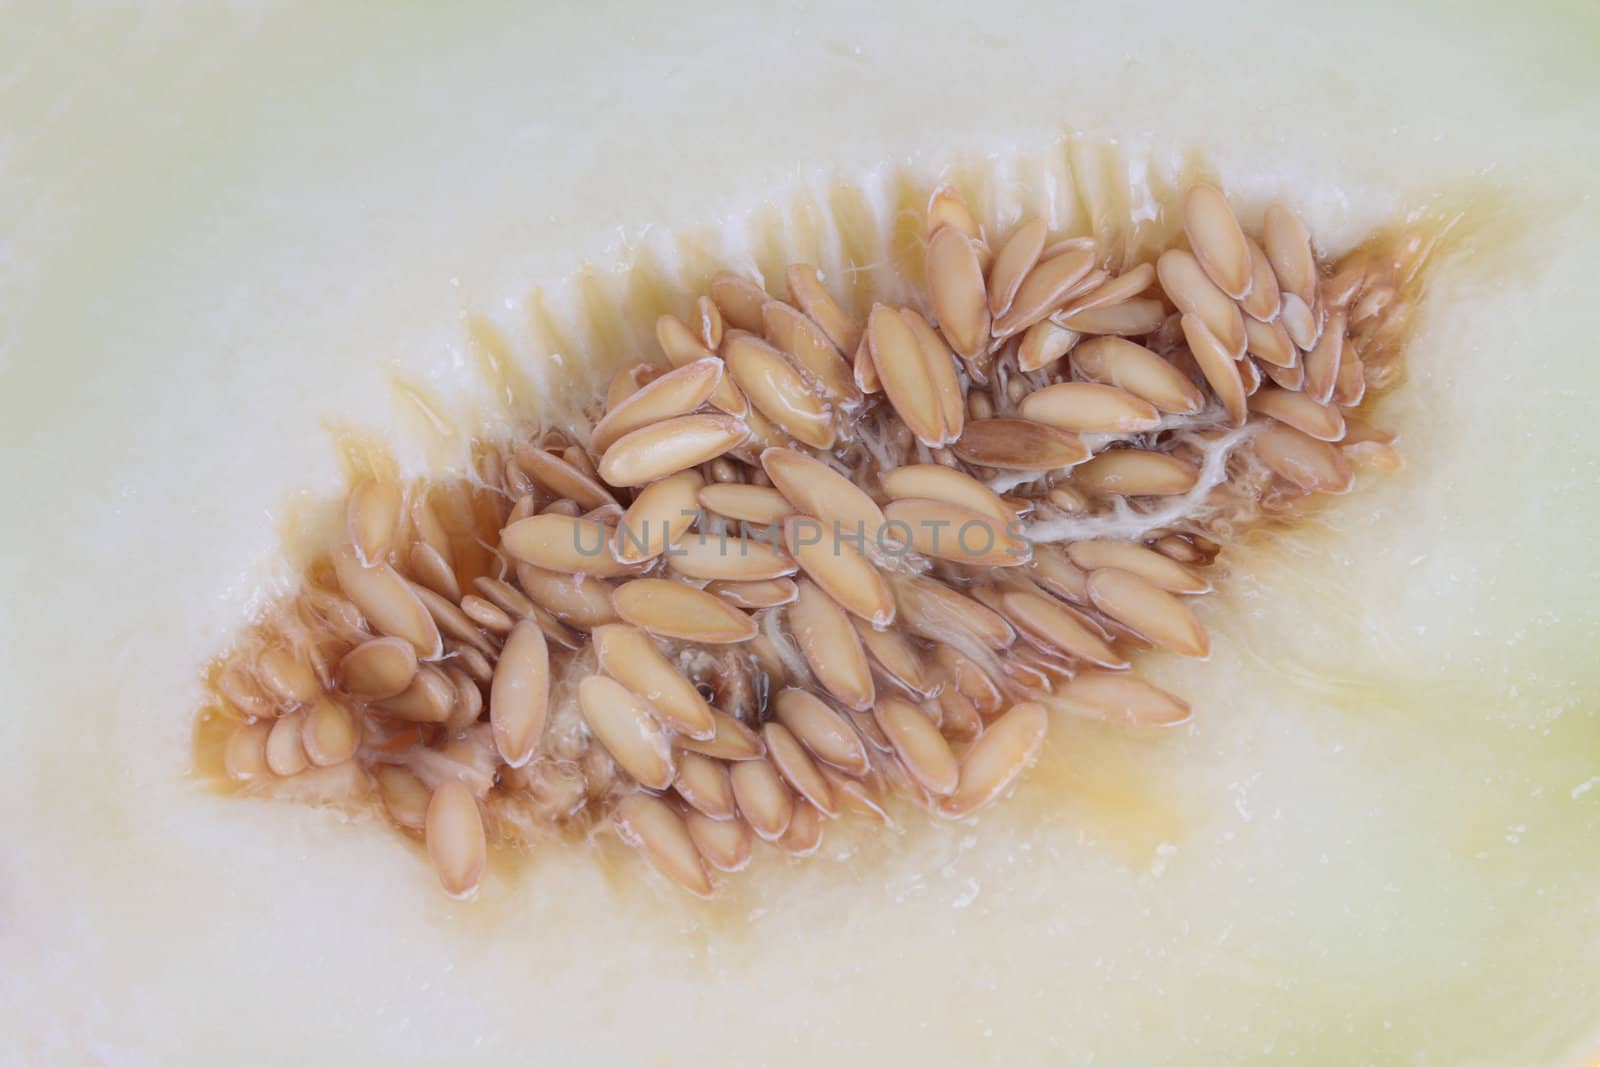 Melon inside background with seeds